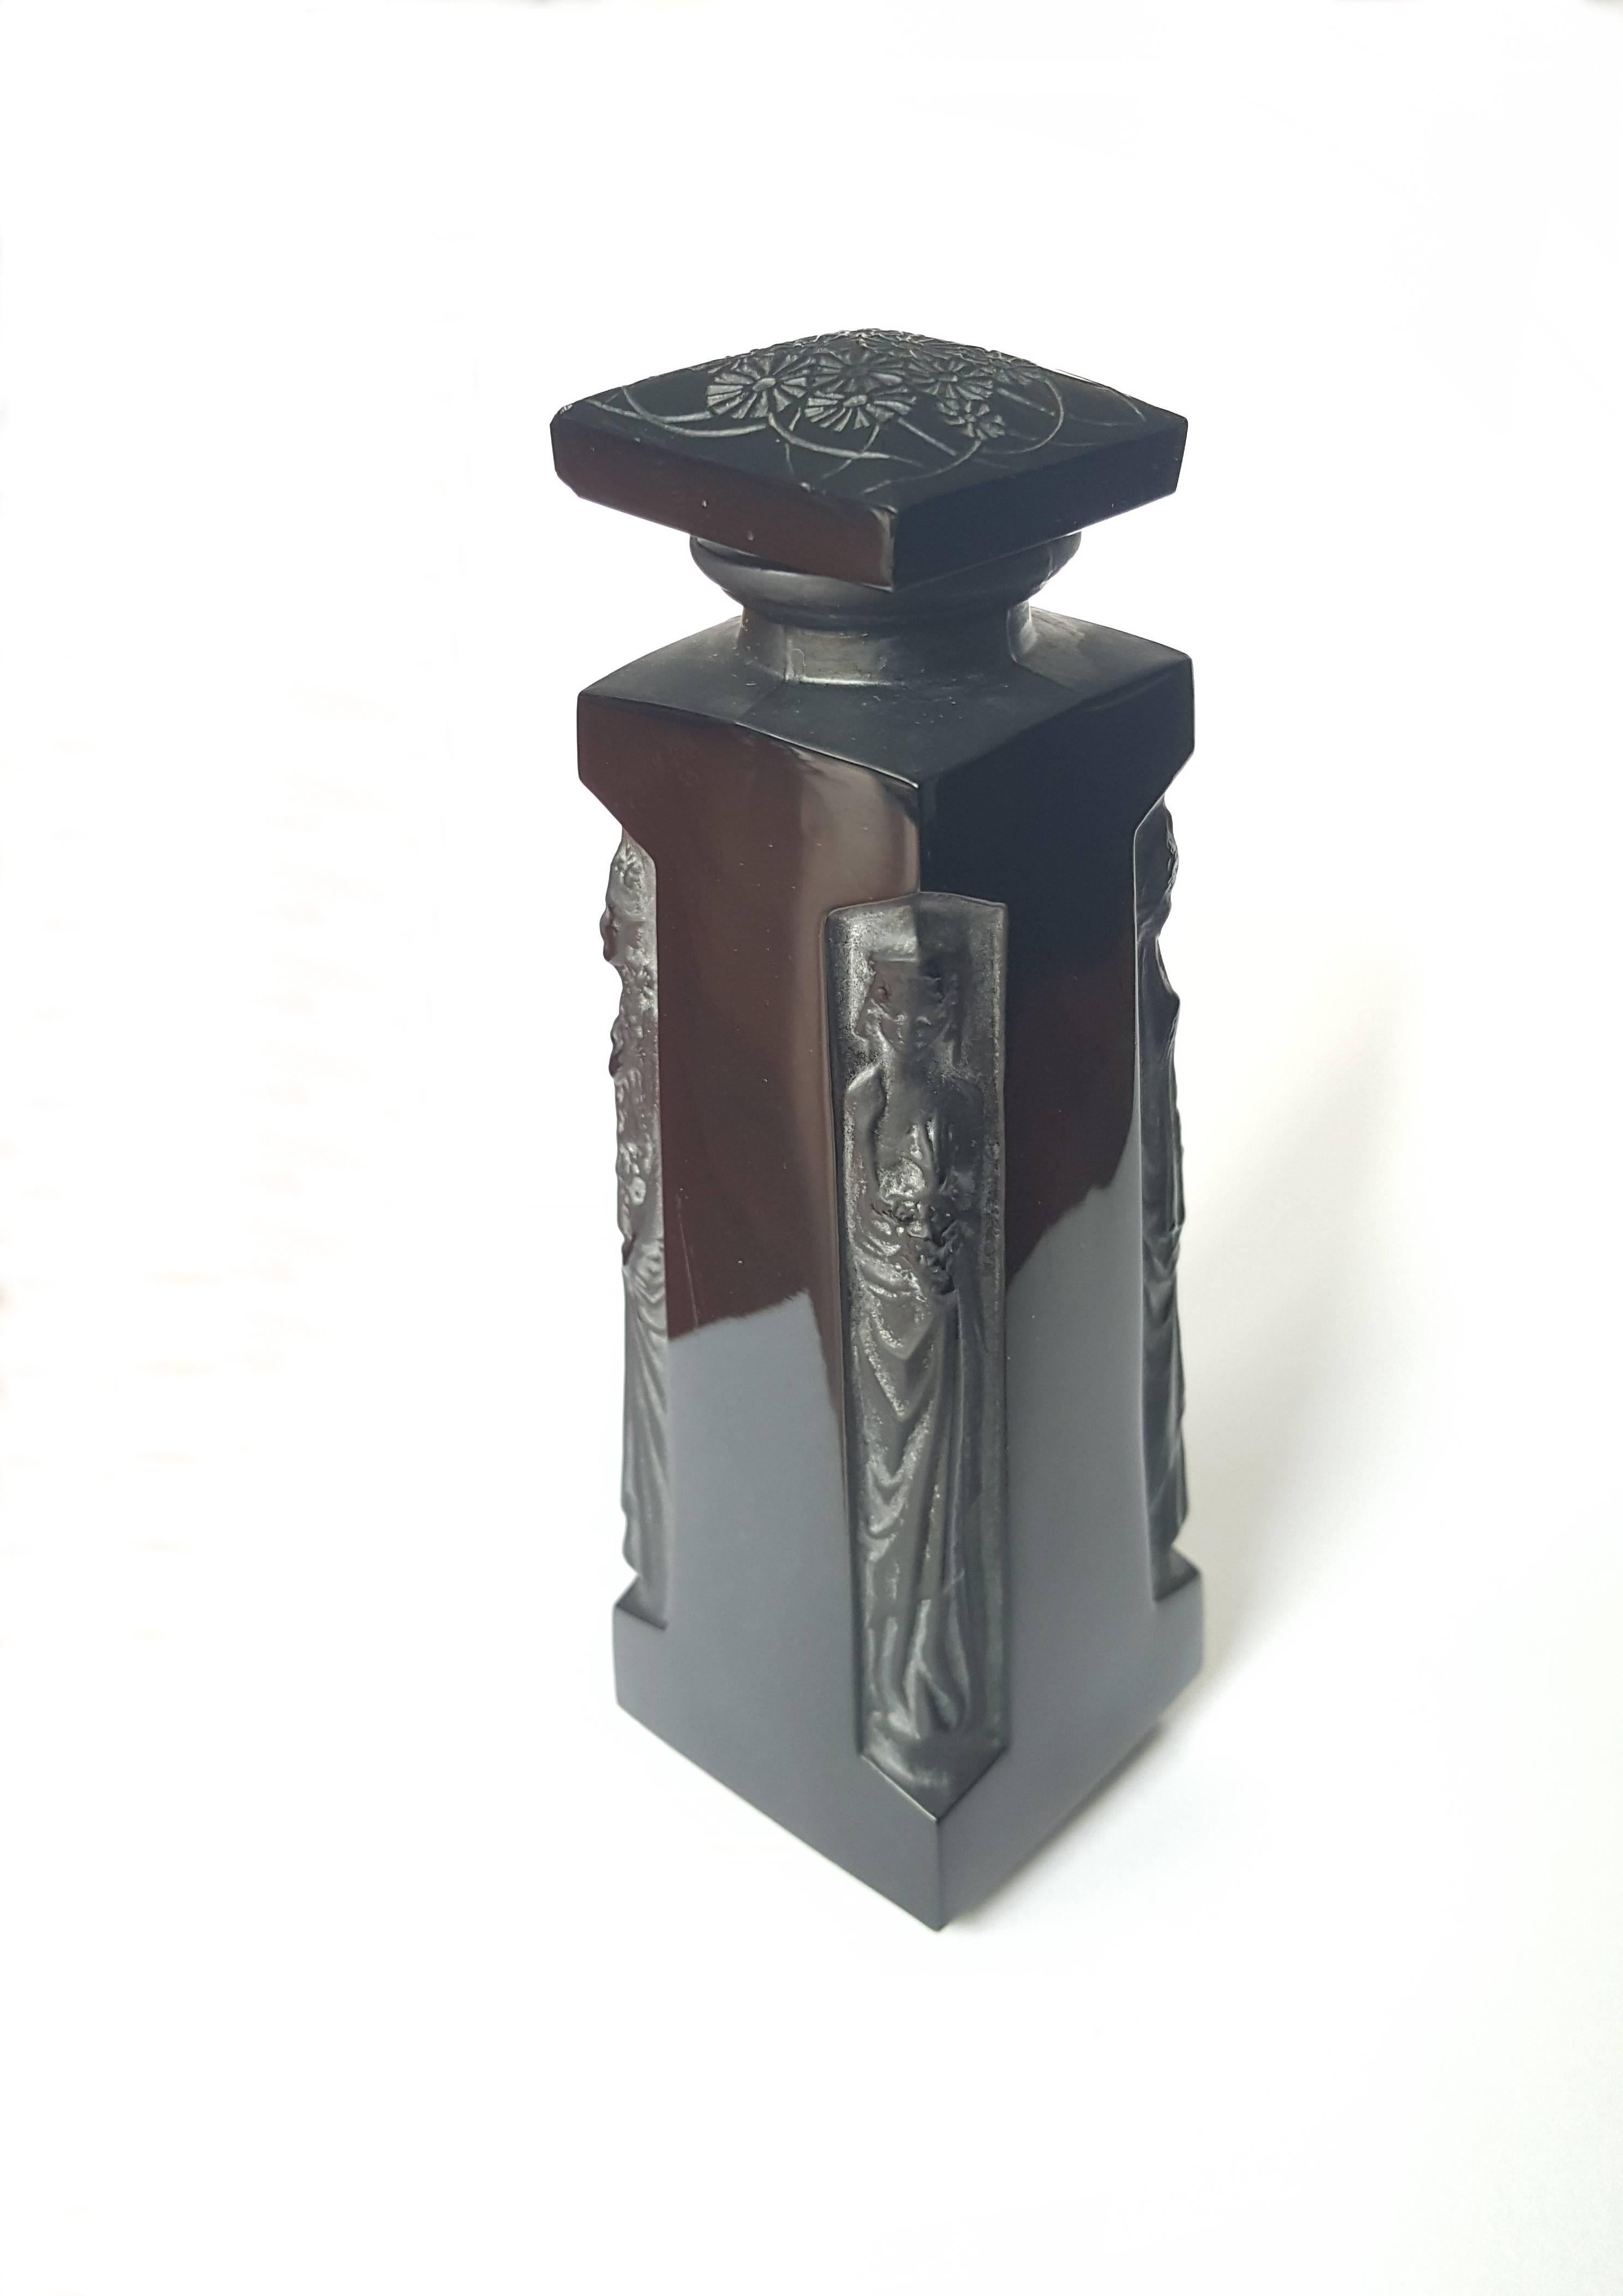 Classic Ambre D'Orsay perfume bottle by René Lalique. Made in black glass with 4 Grecian figures. Floral design on the stopper. Marked at the bottom.
Measurements: Height 5.12 in ( 13 cm ), Width 1.5 in ( 3.8 cm ), Depth 1.5 in ( 3.8 cm ).